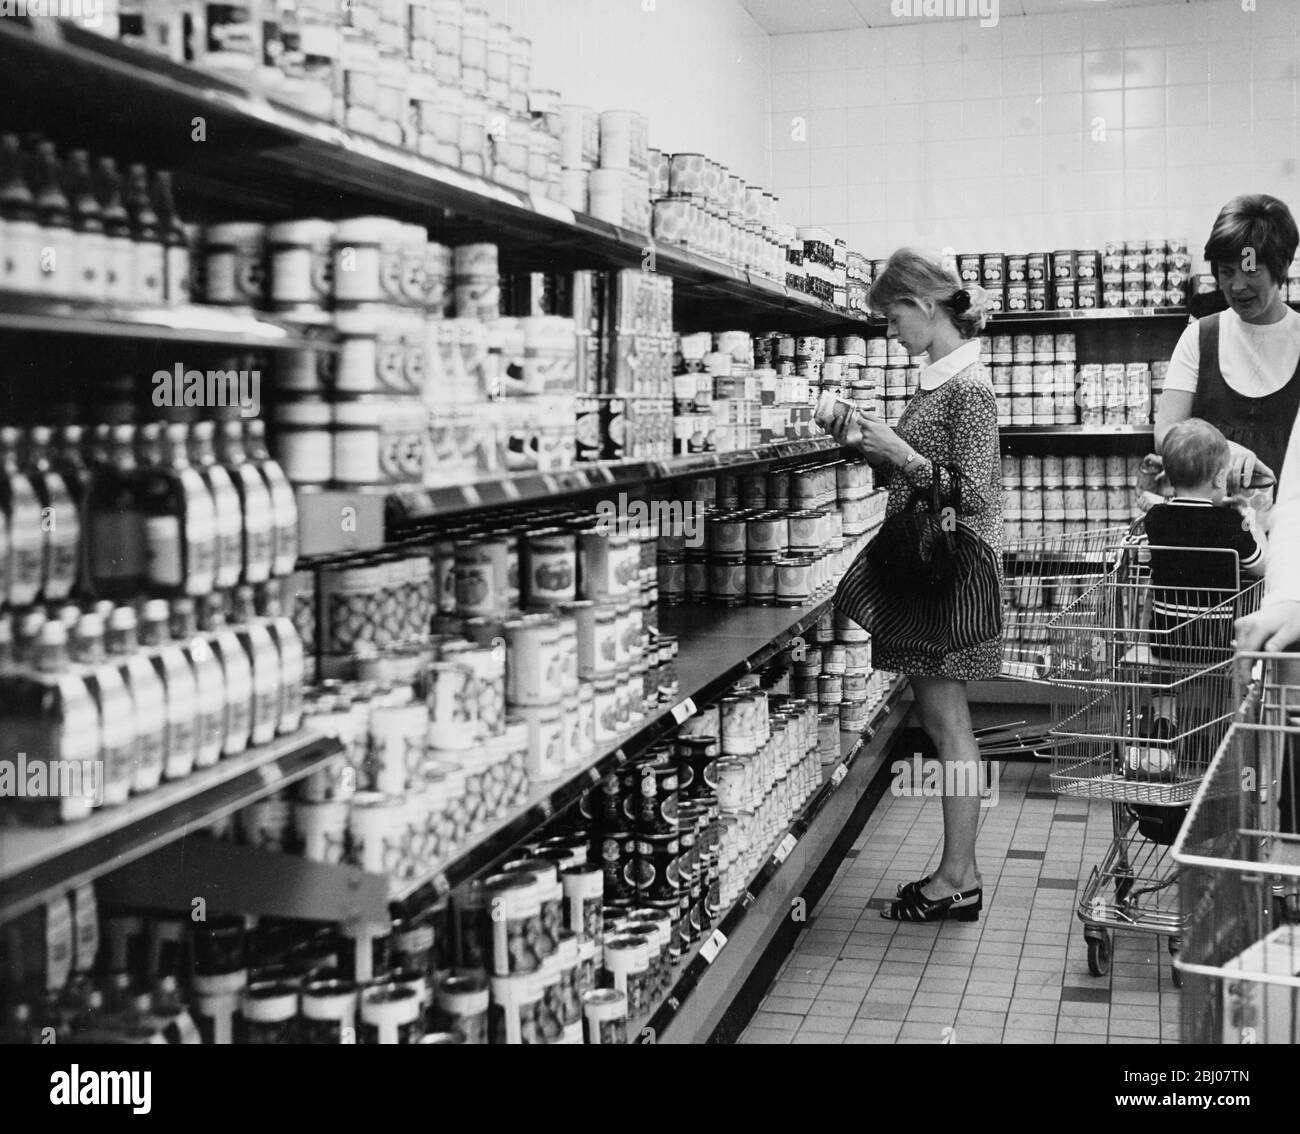 Self-service supermarket. - [Shops, shopping, store, food, woman, shopping trolley, 60s] Stock Photo